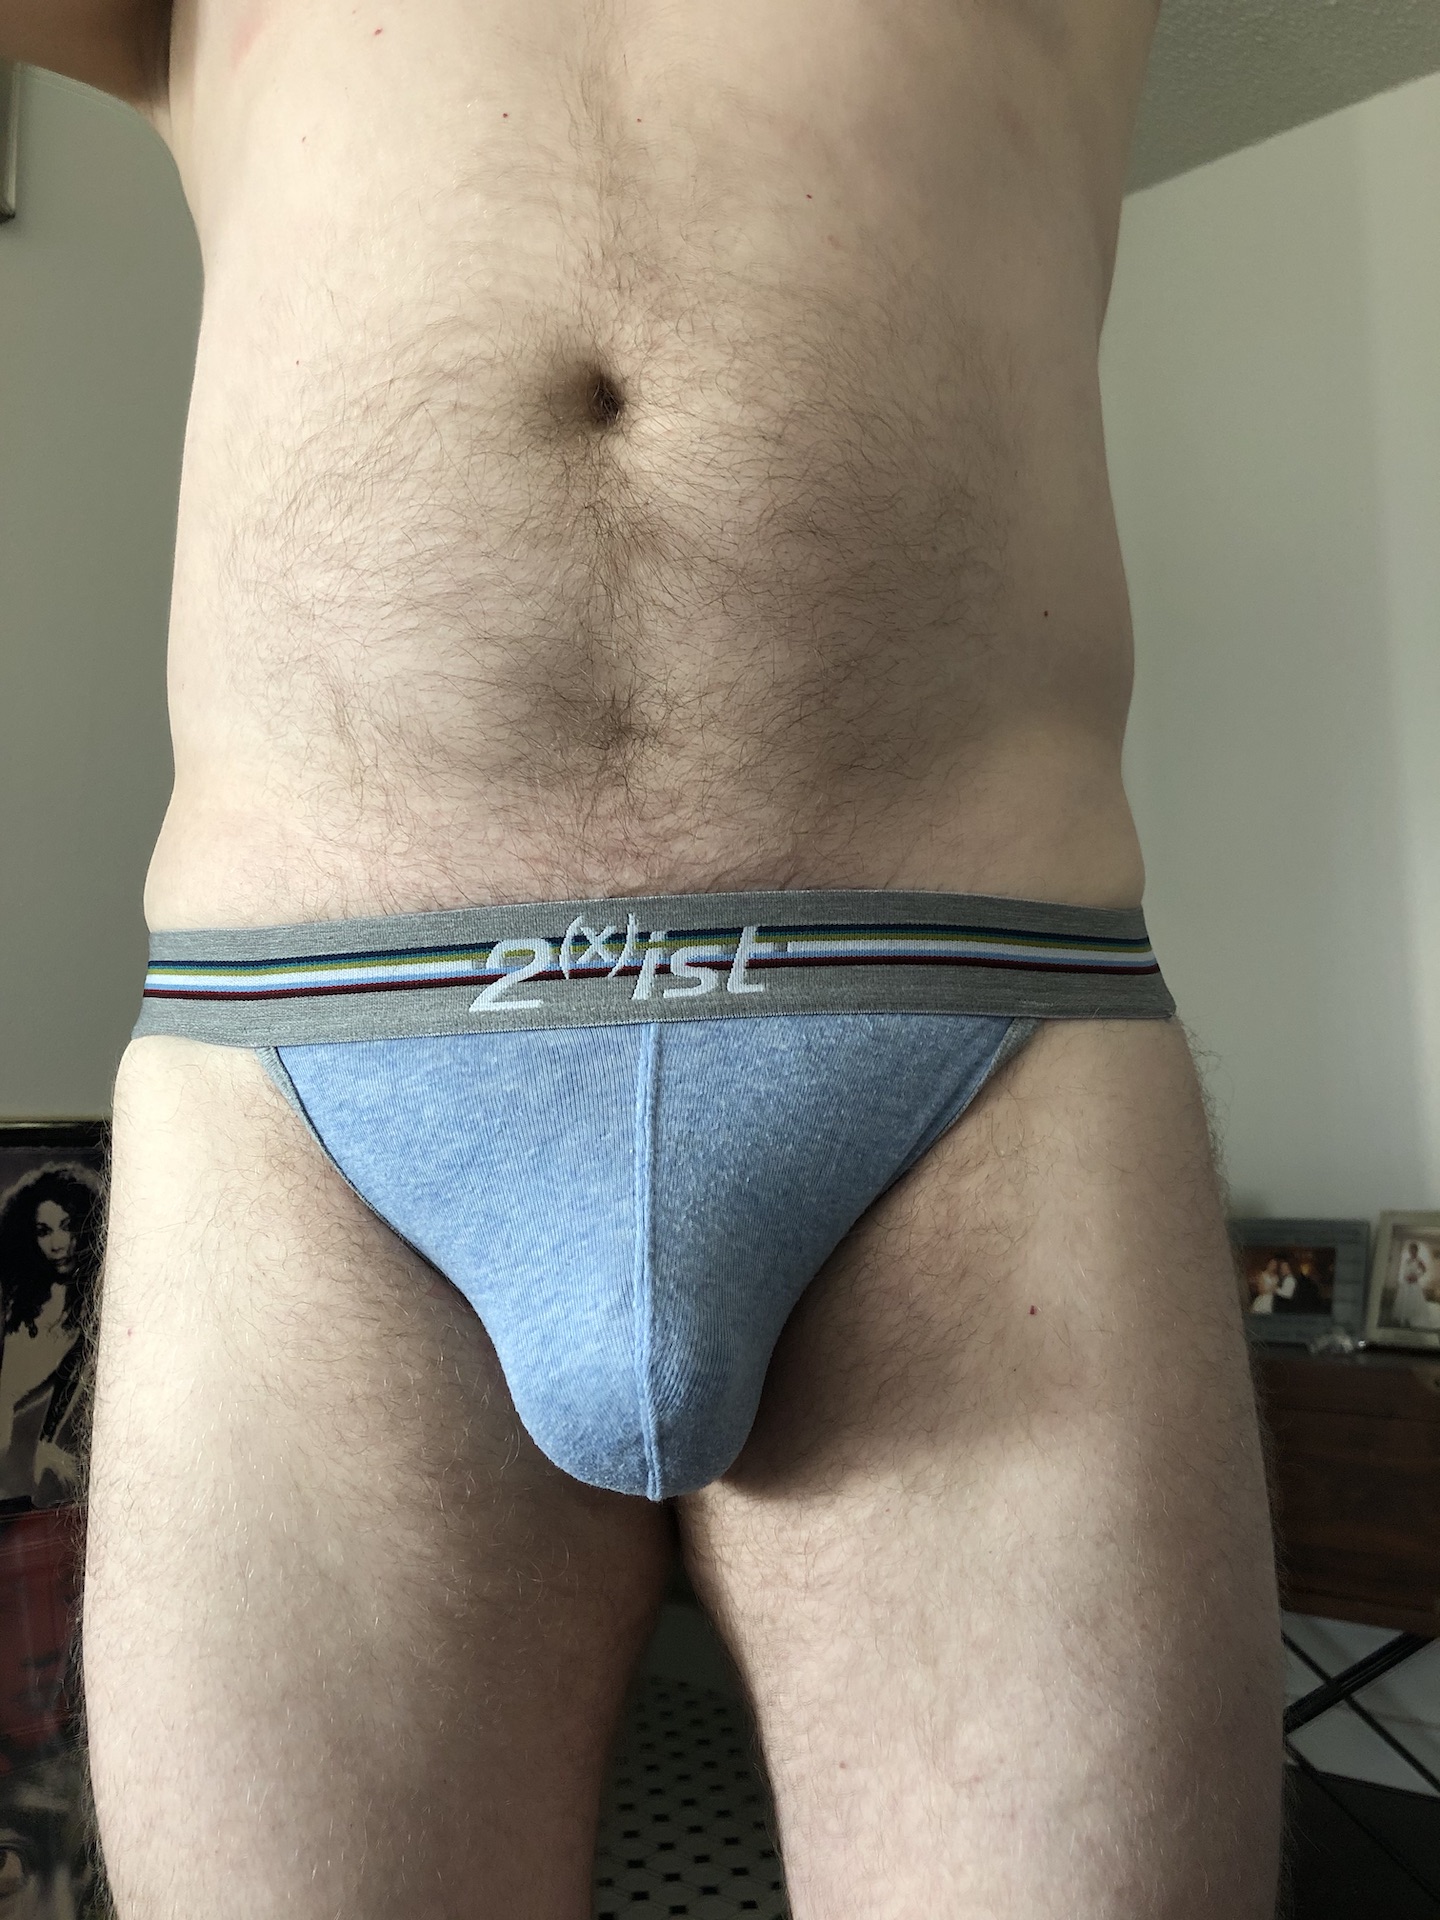 Retro jockstrap from 2xist for this humpday